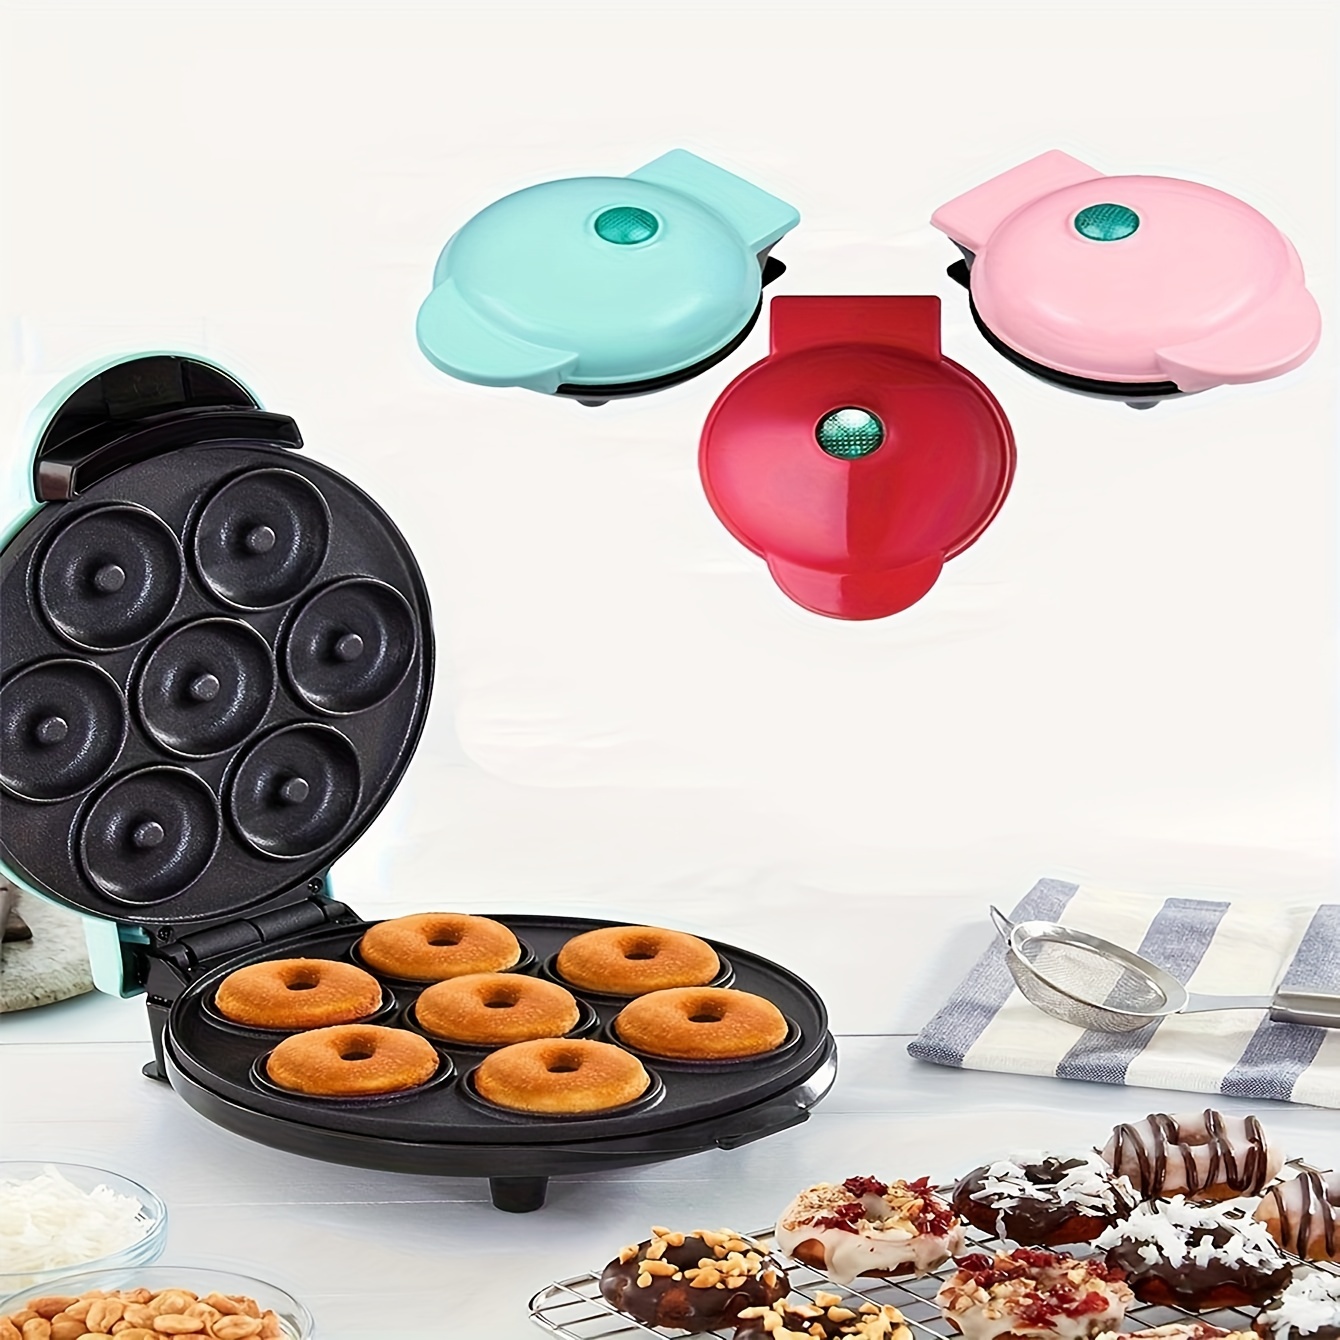 Dash 8” Express Electric Round Griddle for for Pancakes Cookies